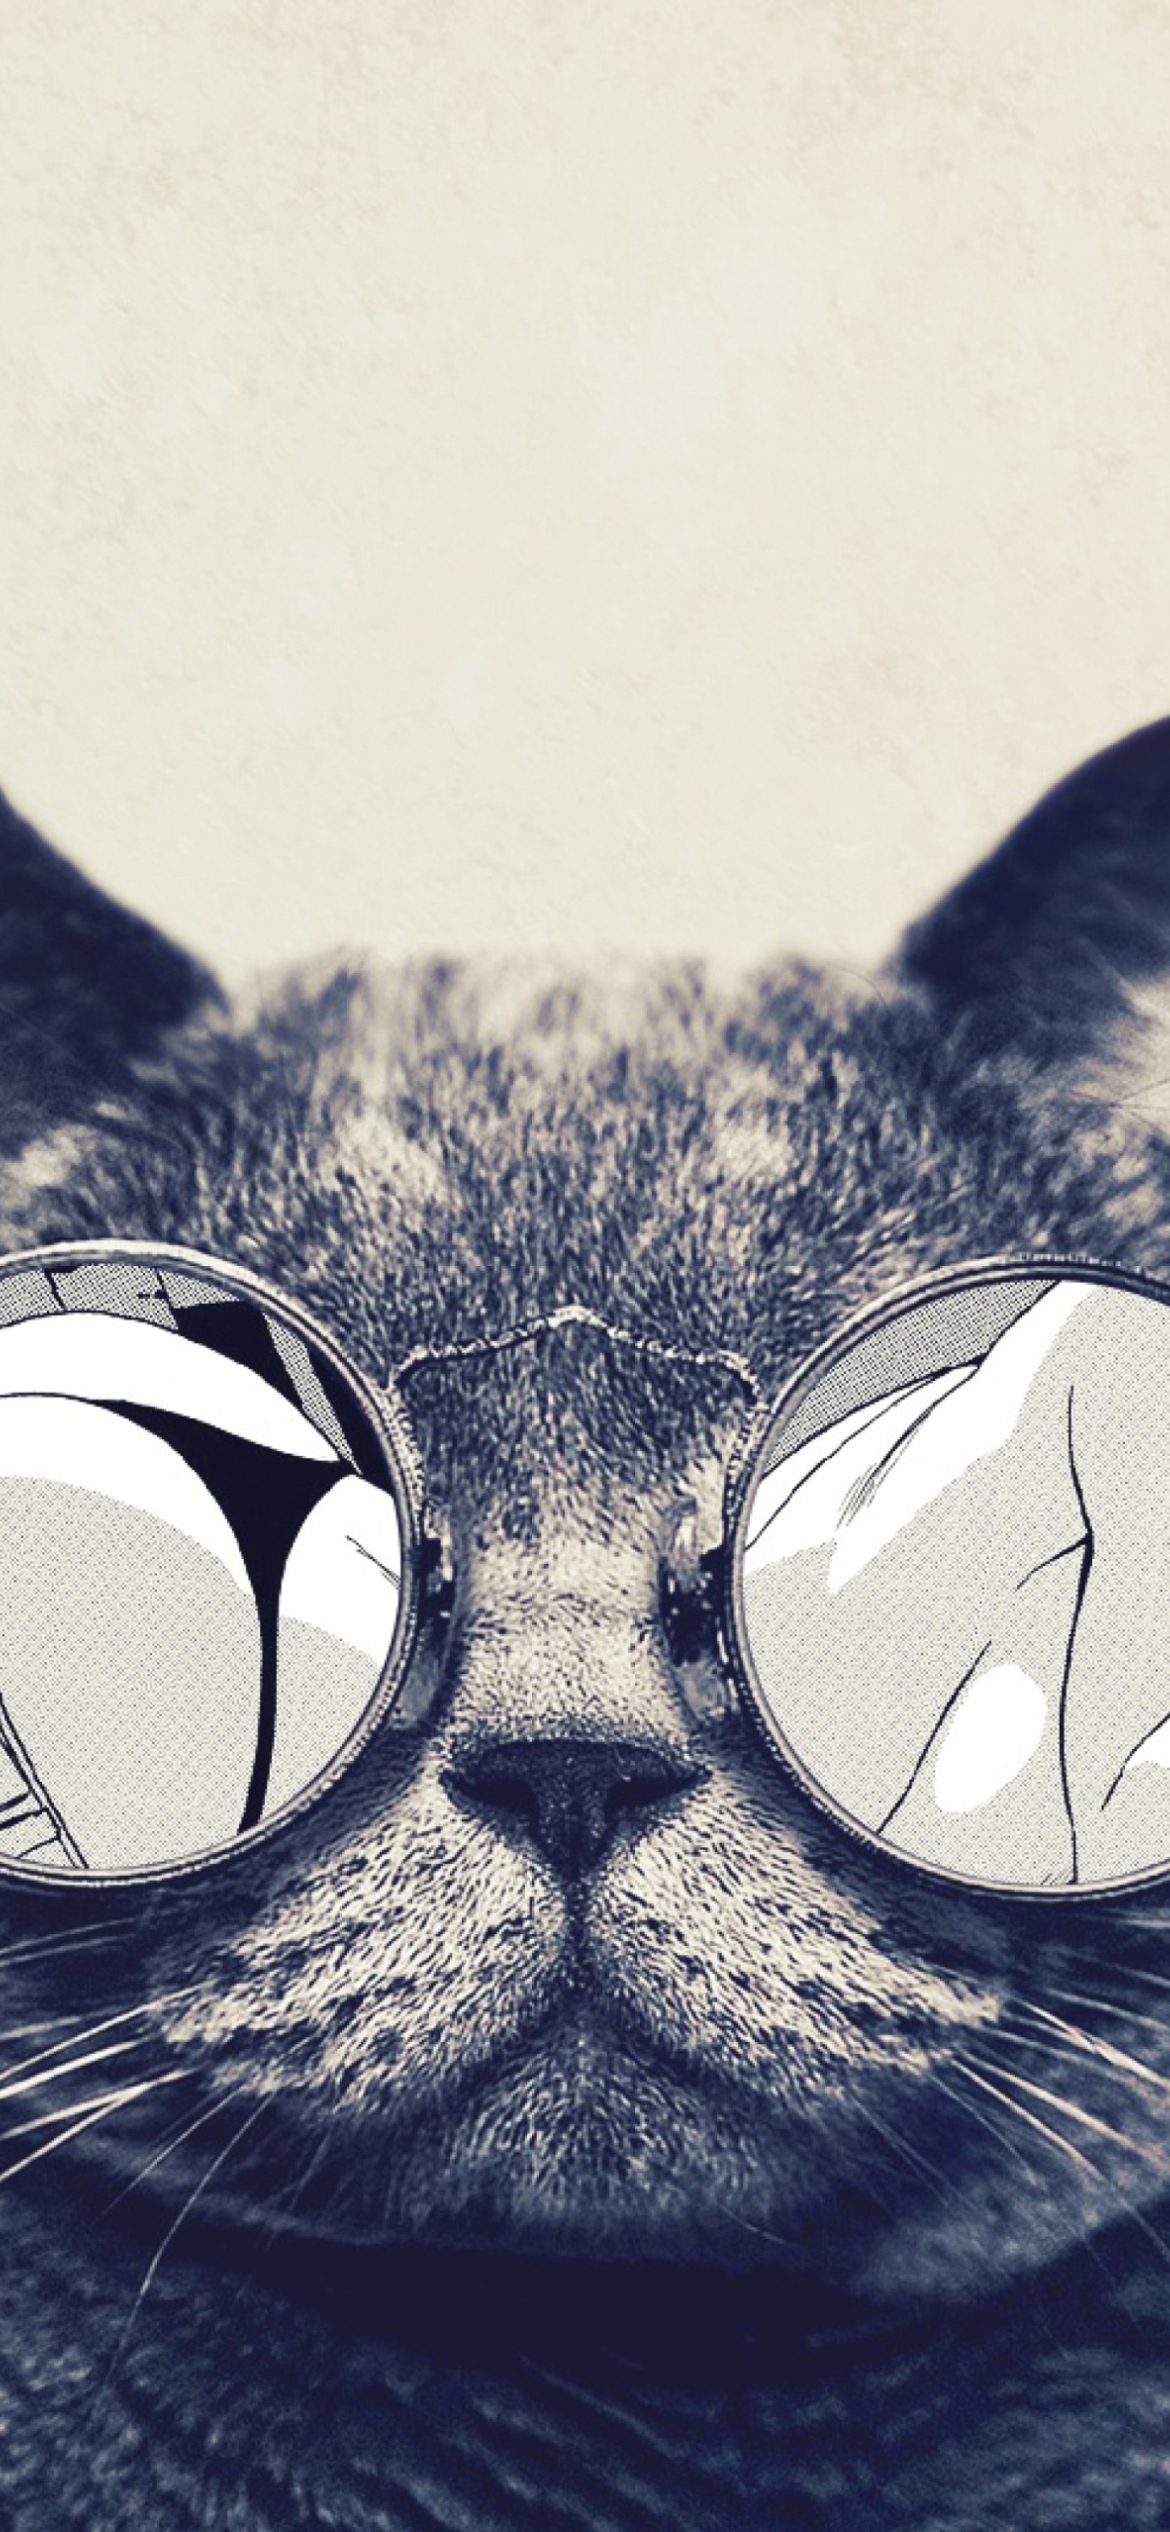 Funny Cat In Round Glasses wallpaper 1170x2532